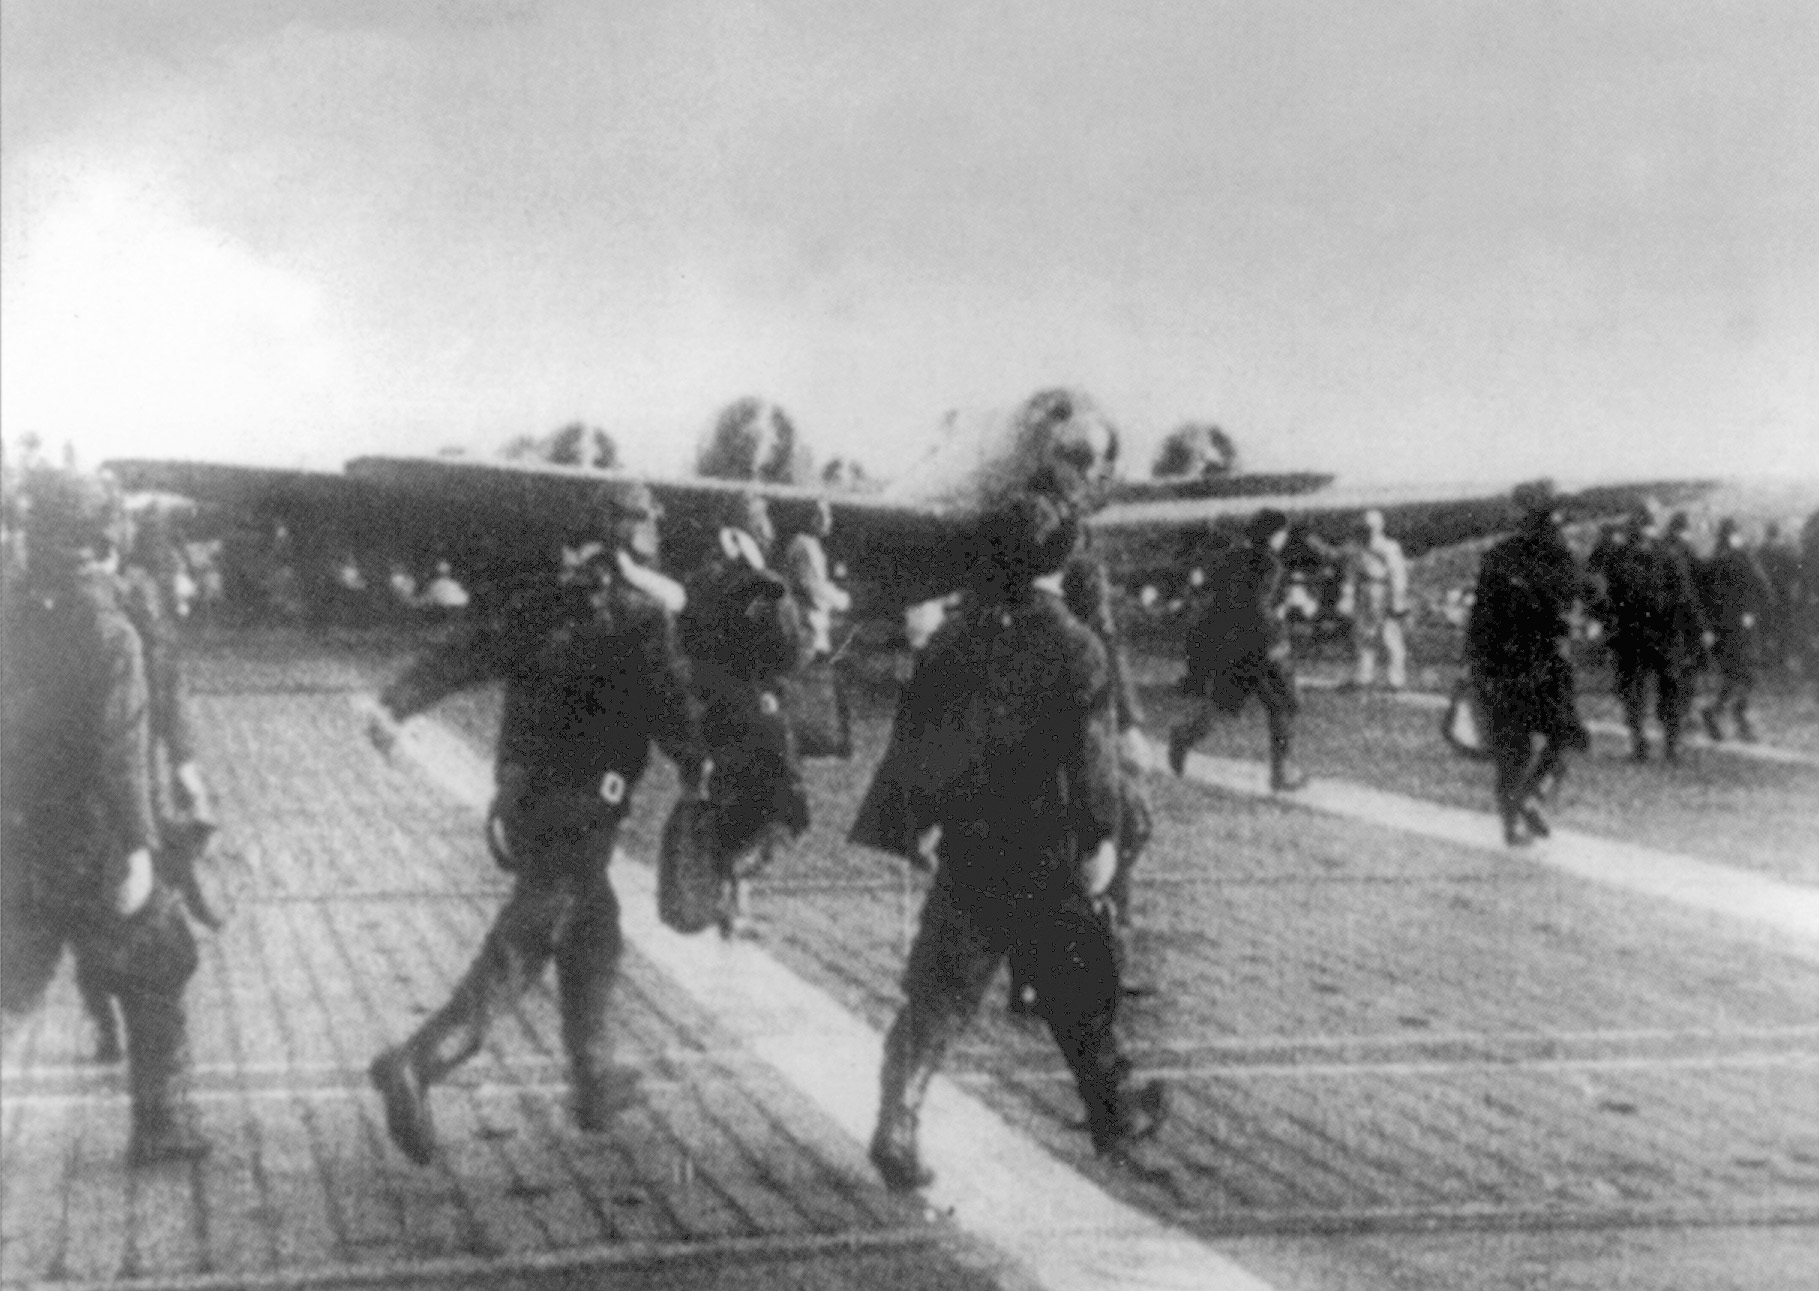 Japanese airmen take to their planes for the attack on Pearl Harbor. The Japanese fleet sailed through storm and fog across the North Pacific and away from the normal sea lanes to arrive undetected two hundred miles away from Hawaii on the morning of December 7.